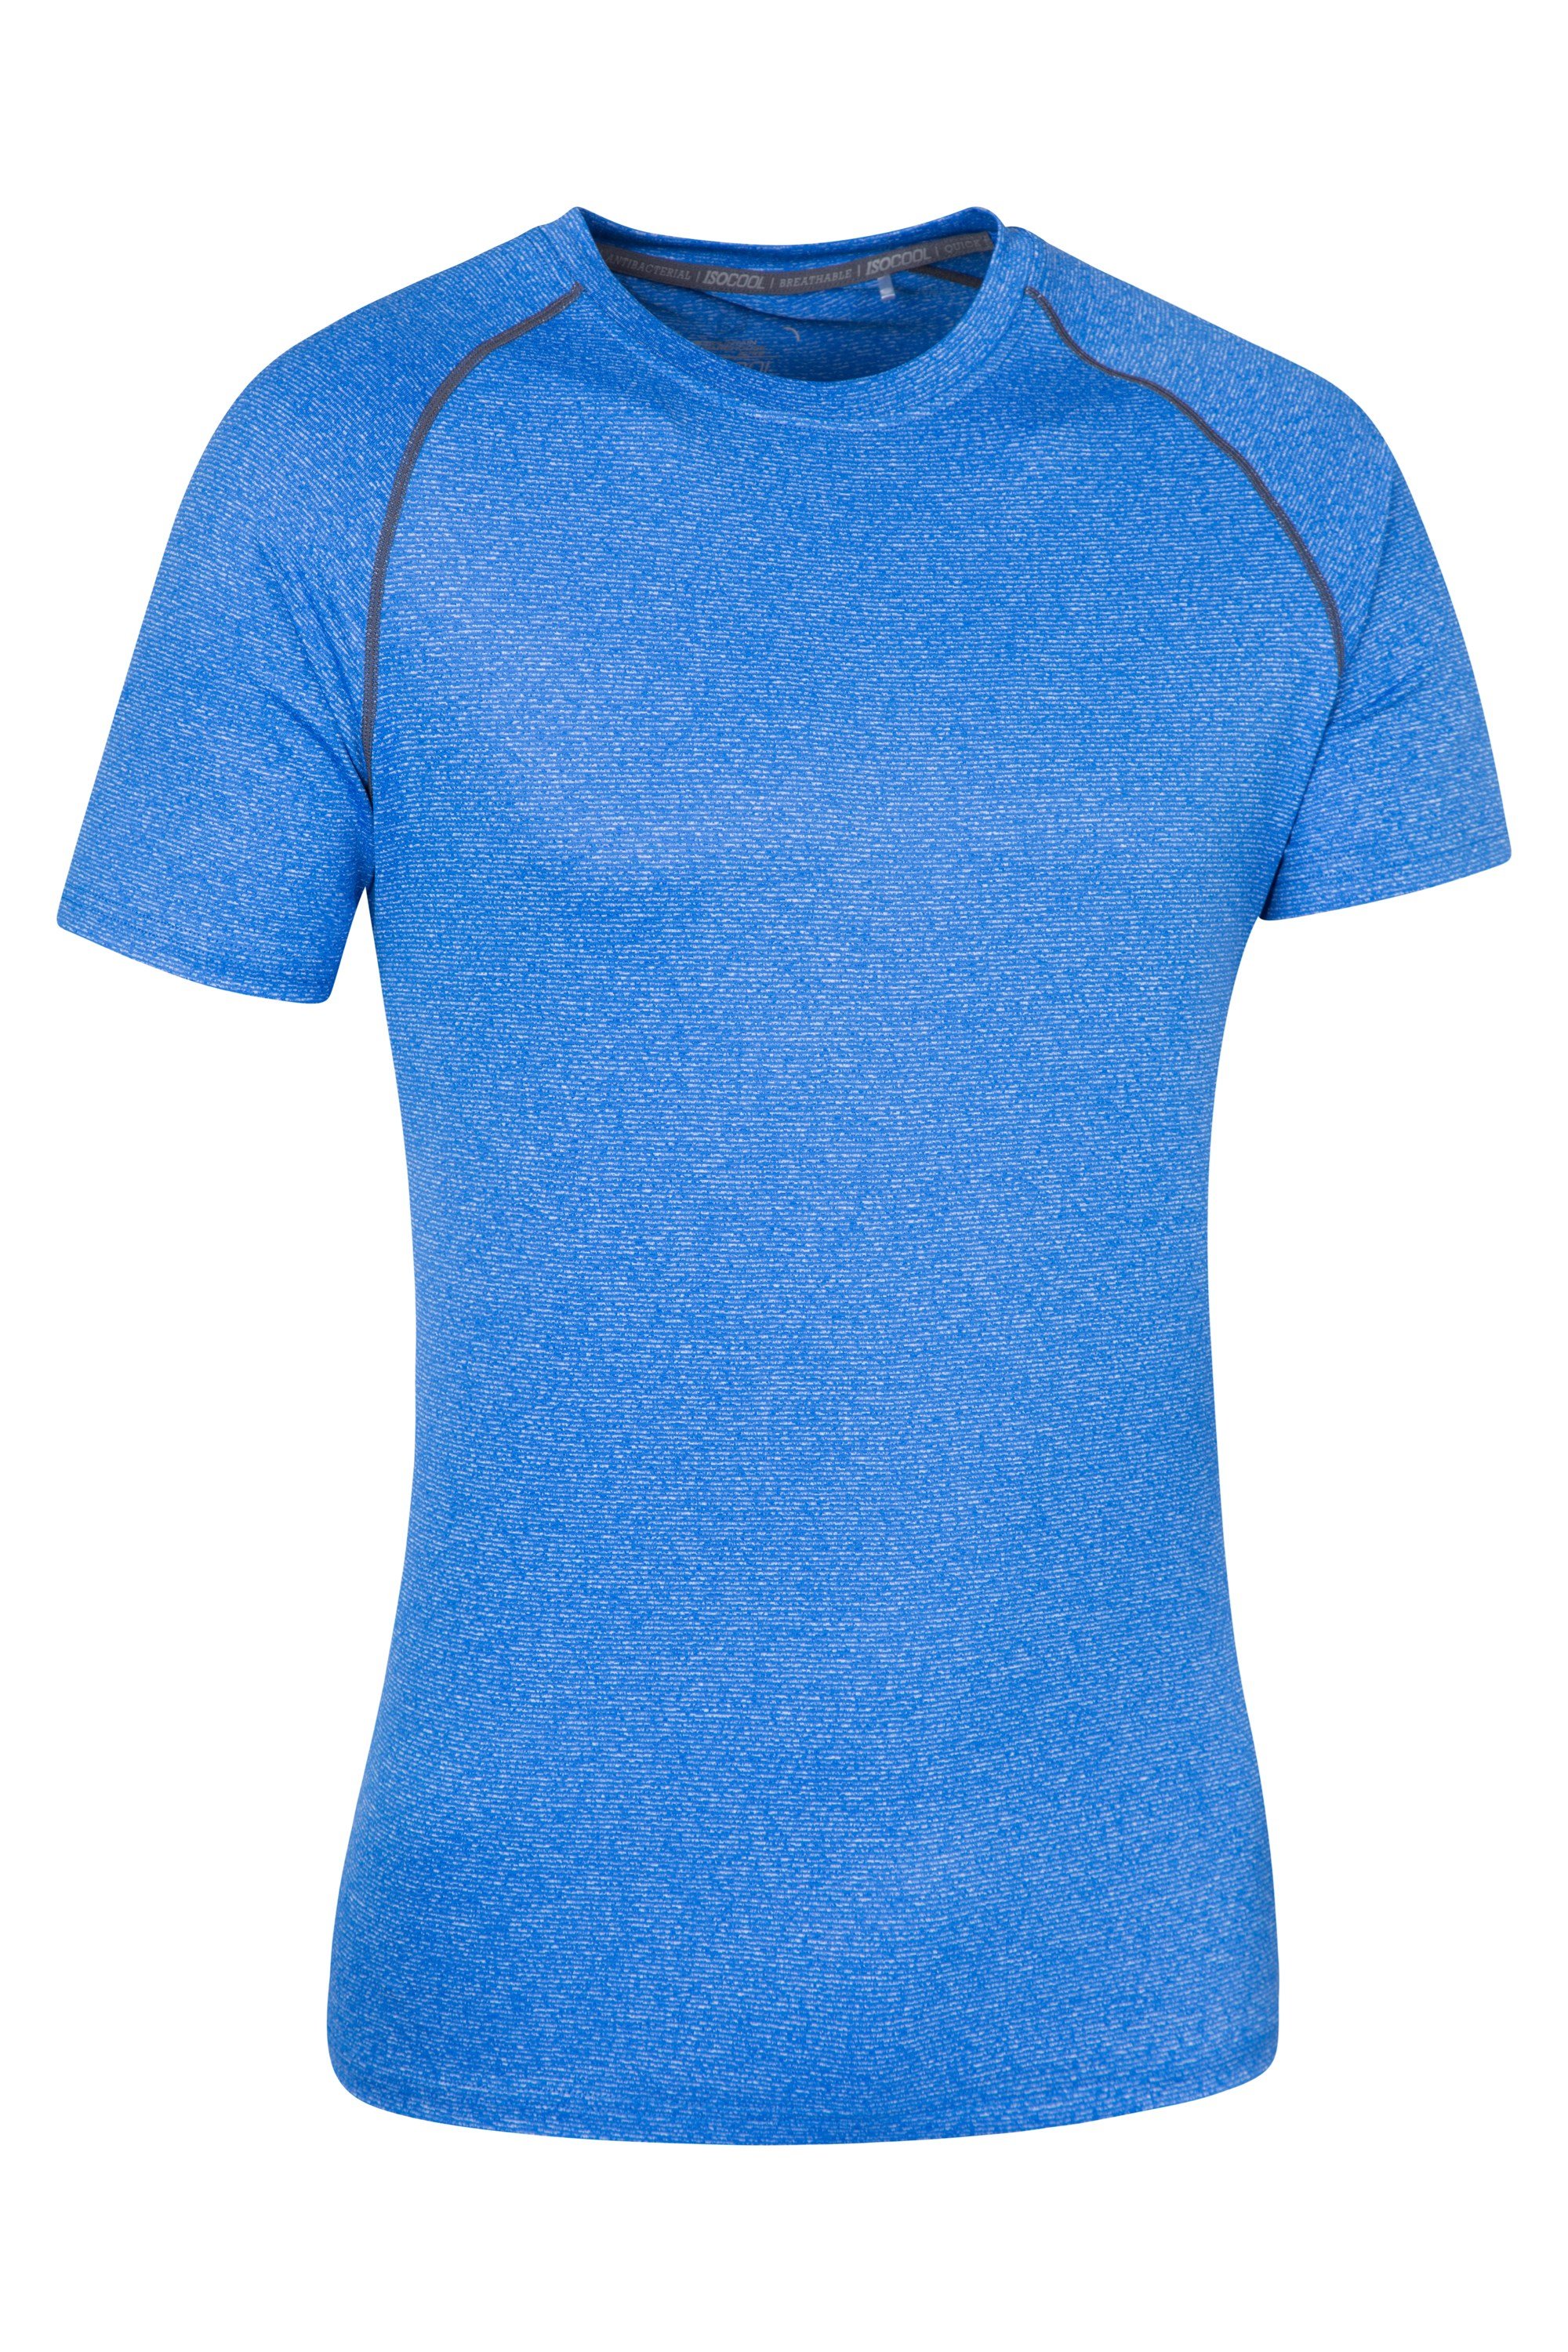 Warm Tee Shirt UV Sweat Wicking Top for Gym Cosy Outdoors Sports Lightweight T-Shirt Mountain Warehouse Cosmo Mens IsoCool Tee